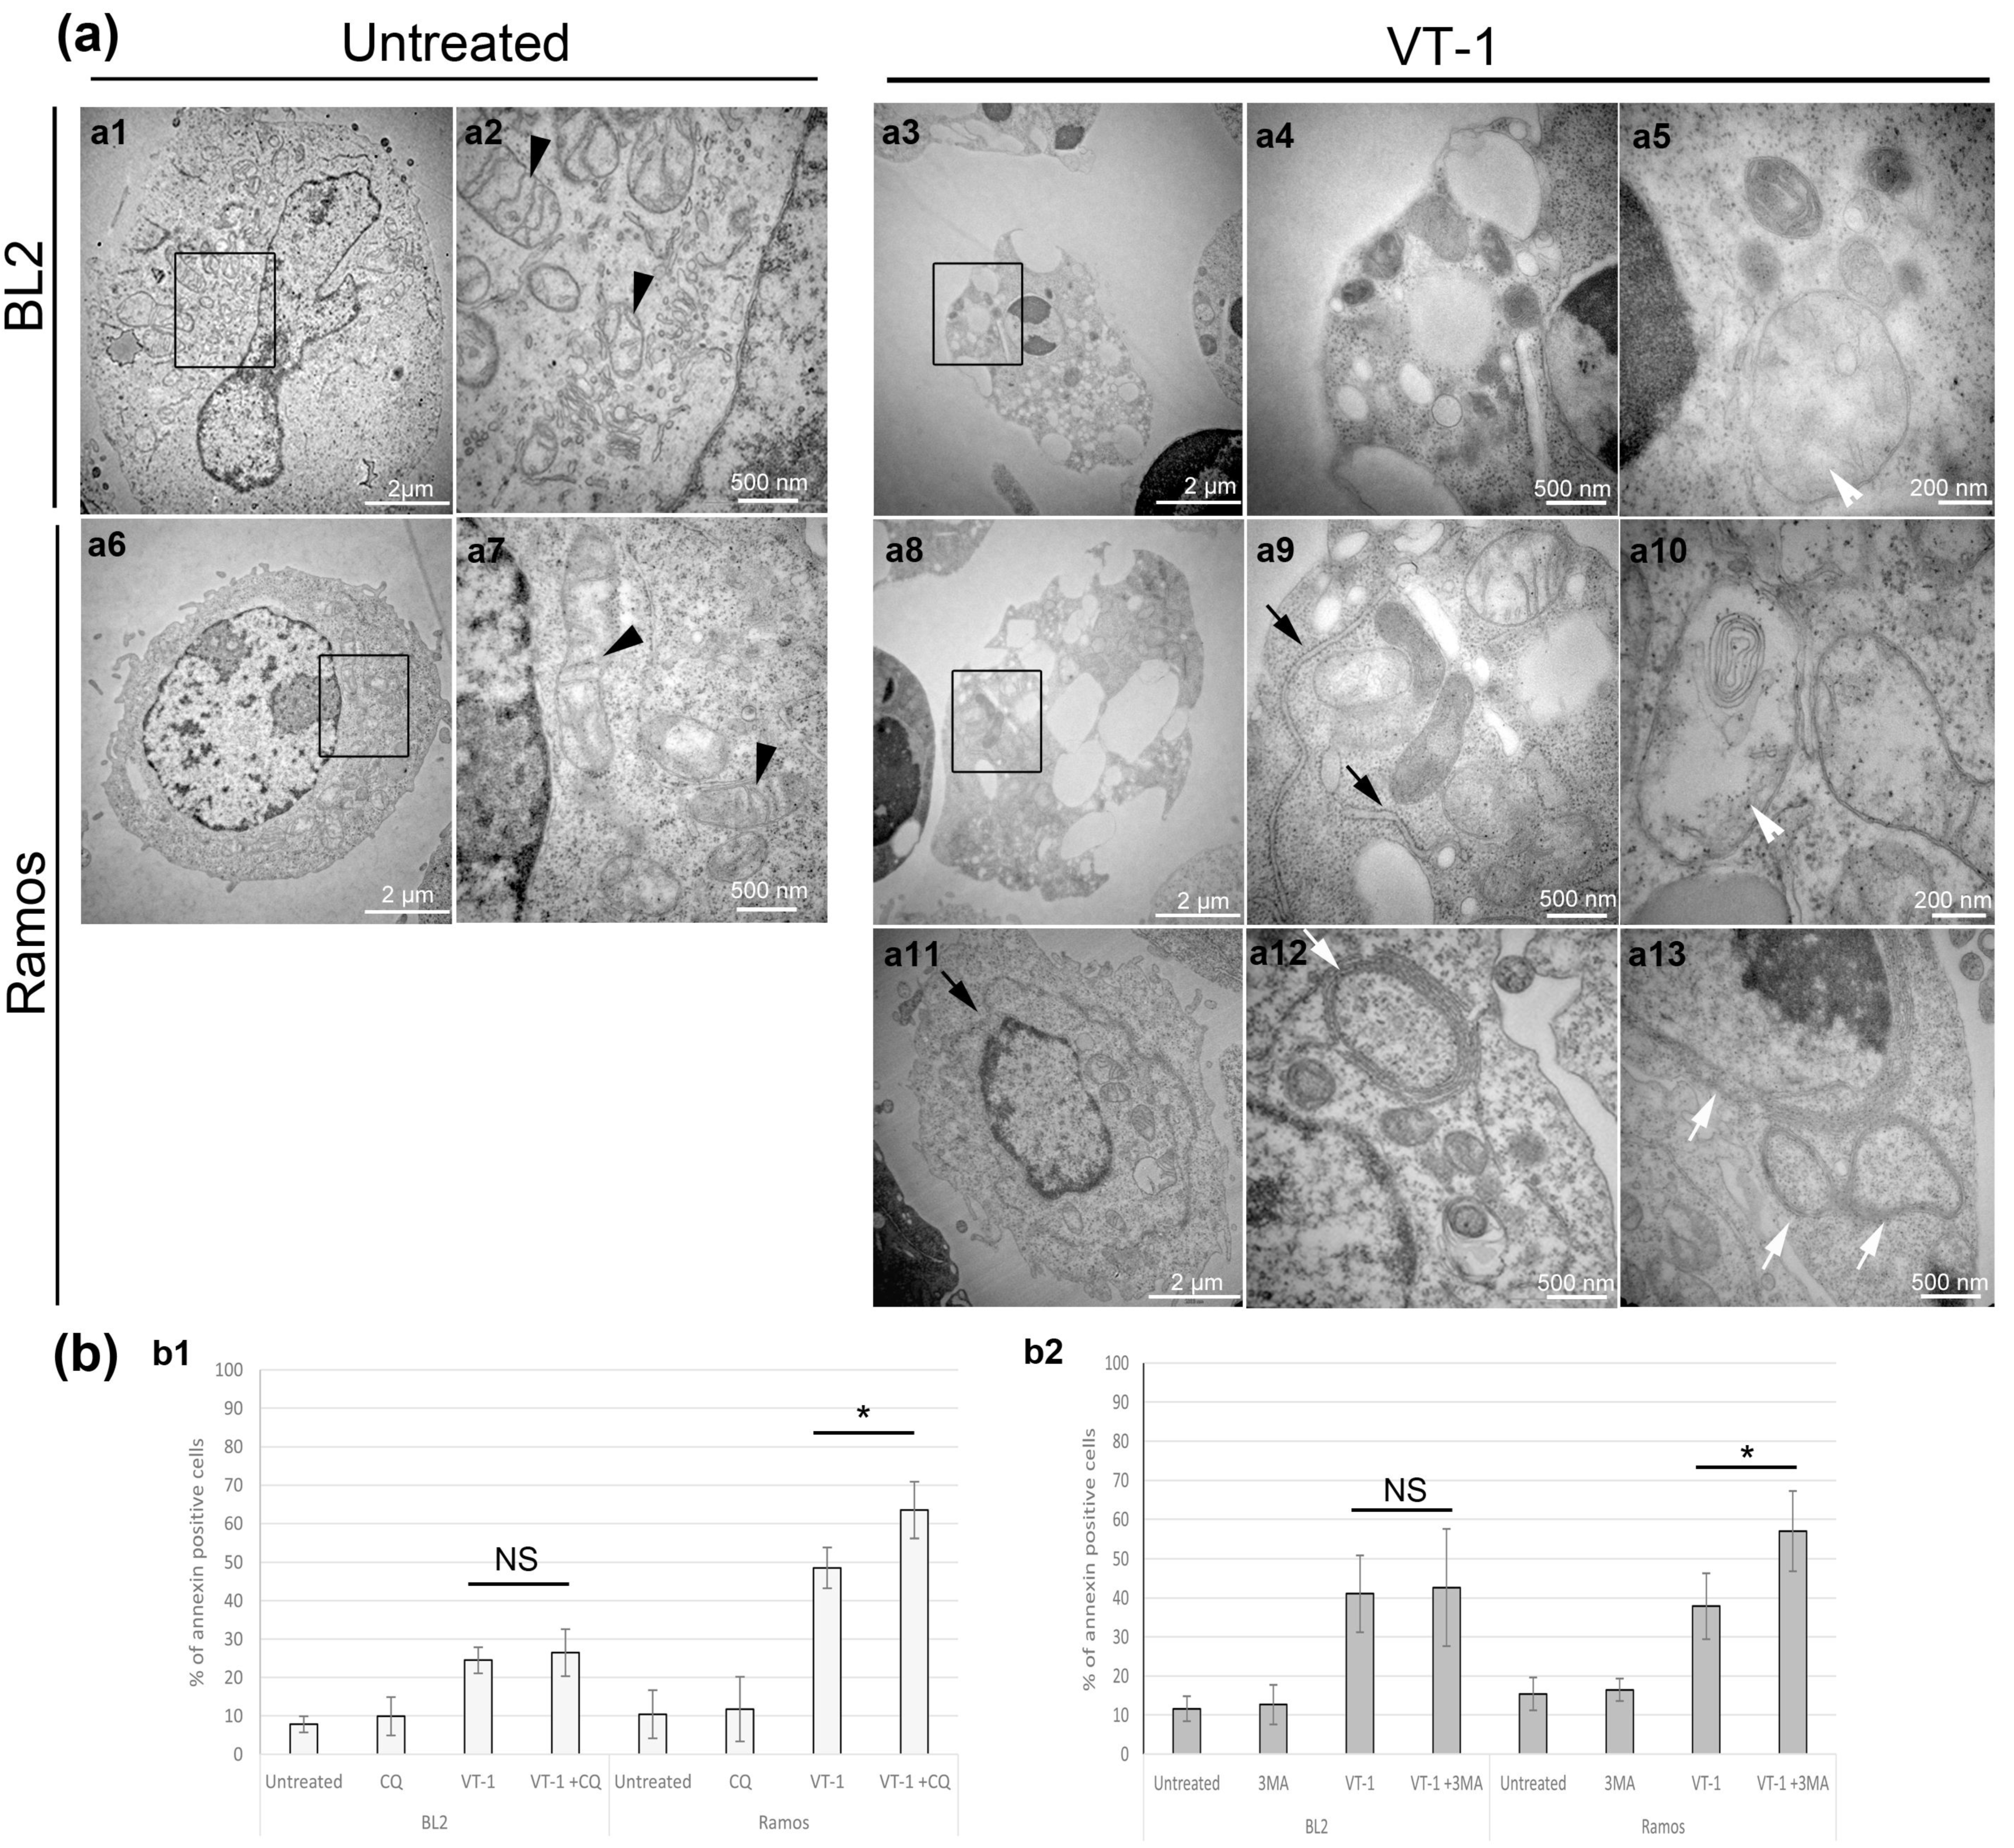 Toxins | Free Full-Text | Verotoxin-1-Induced ER Stress Triggers Apoptotic  or Survival Pathways in Burkitt Lymphoma Cells